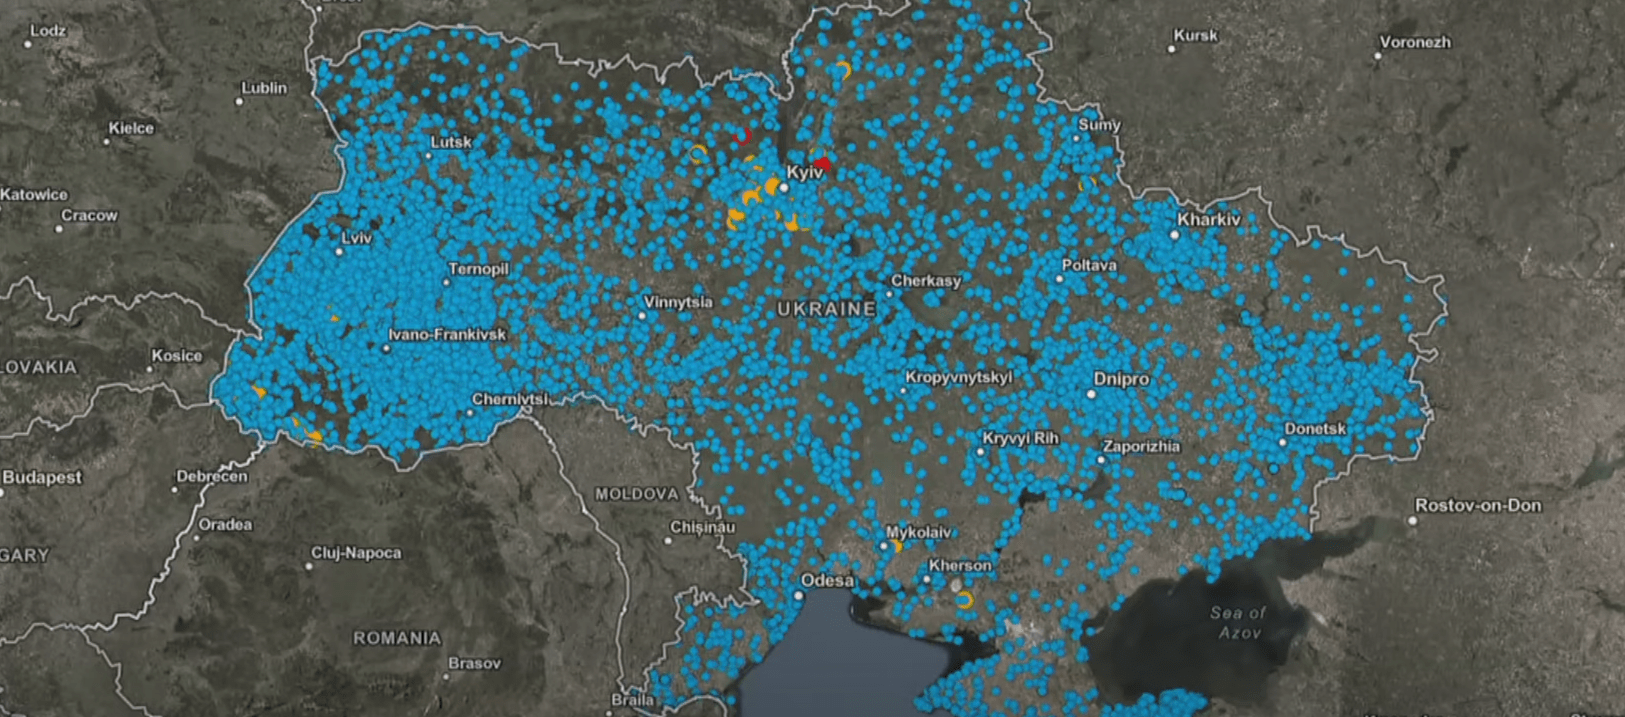 Map of Ukraine with blue and yellow dots indicating cultural heritage sites at risk